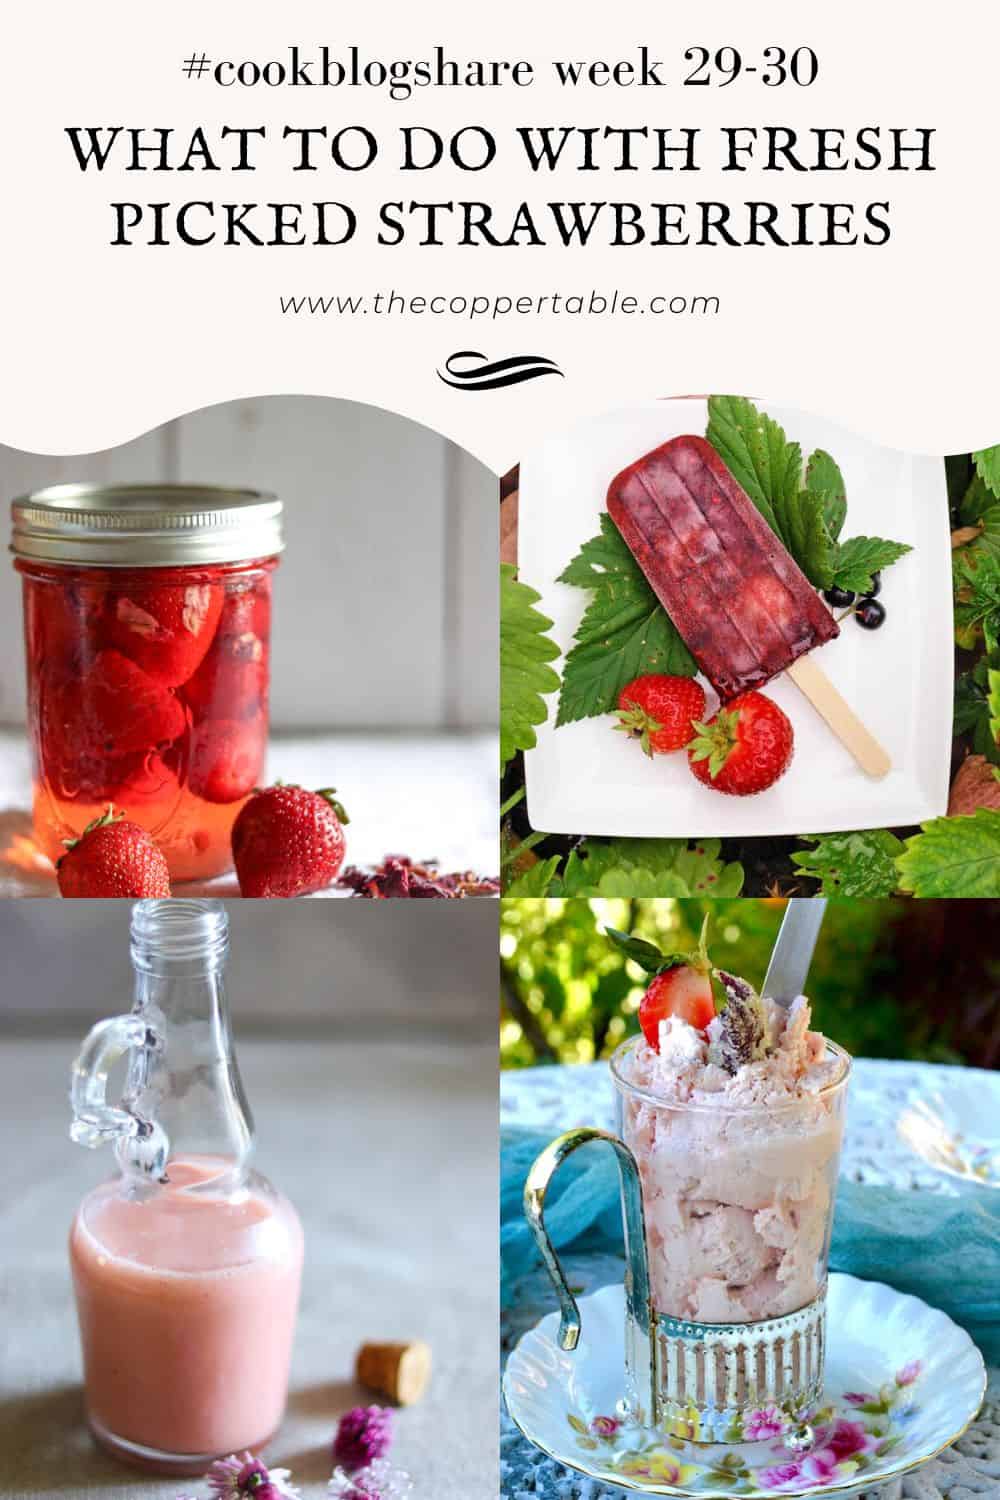 images of recipes using strawberries